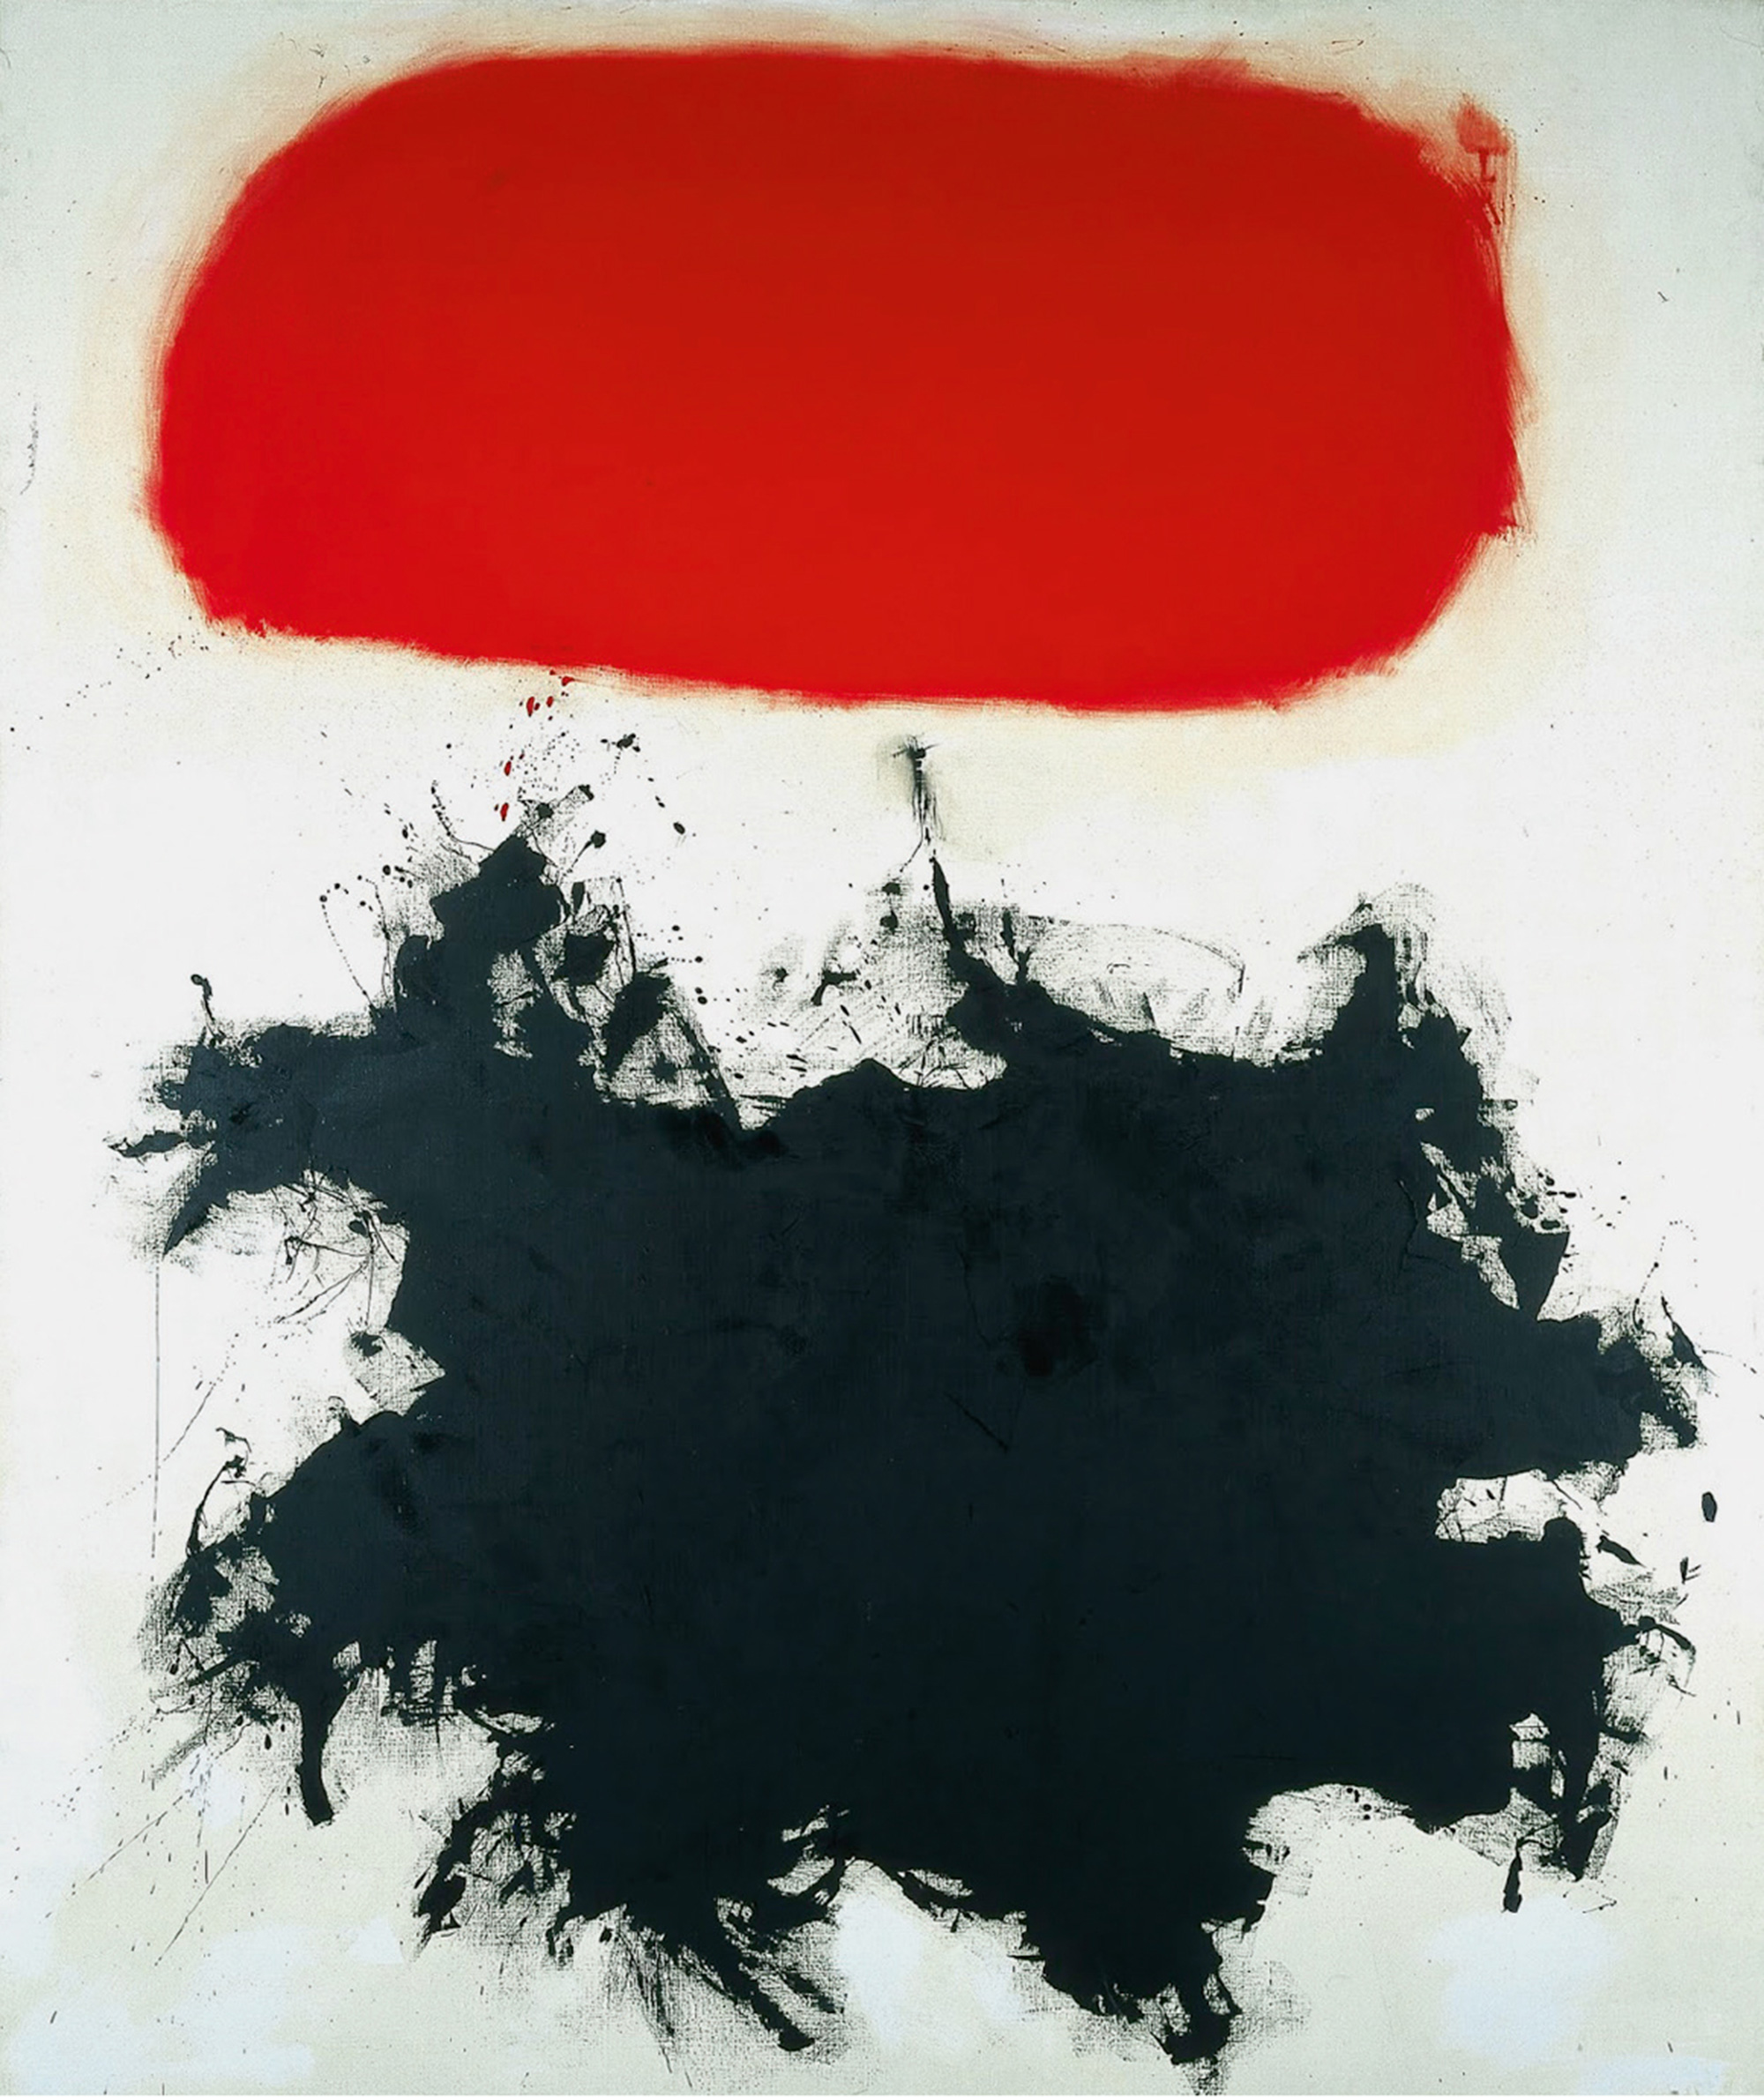 Adolph Gottlieb’s nineteen fifty-six painting titled “Cadmium Red Above Black”, depicting a nebulous cloud of red hovering above a black stormy form.